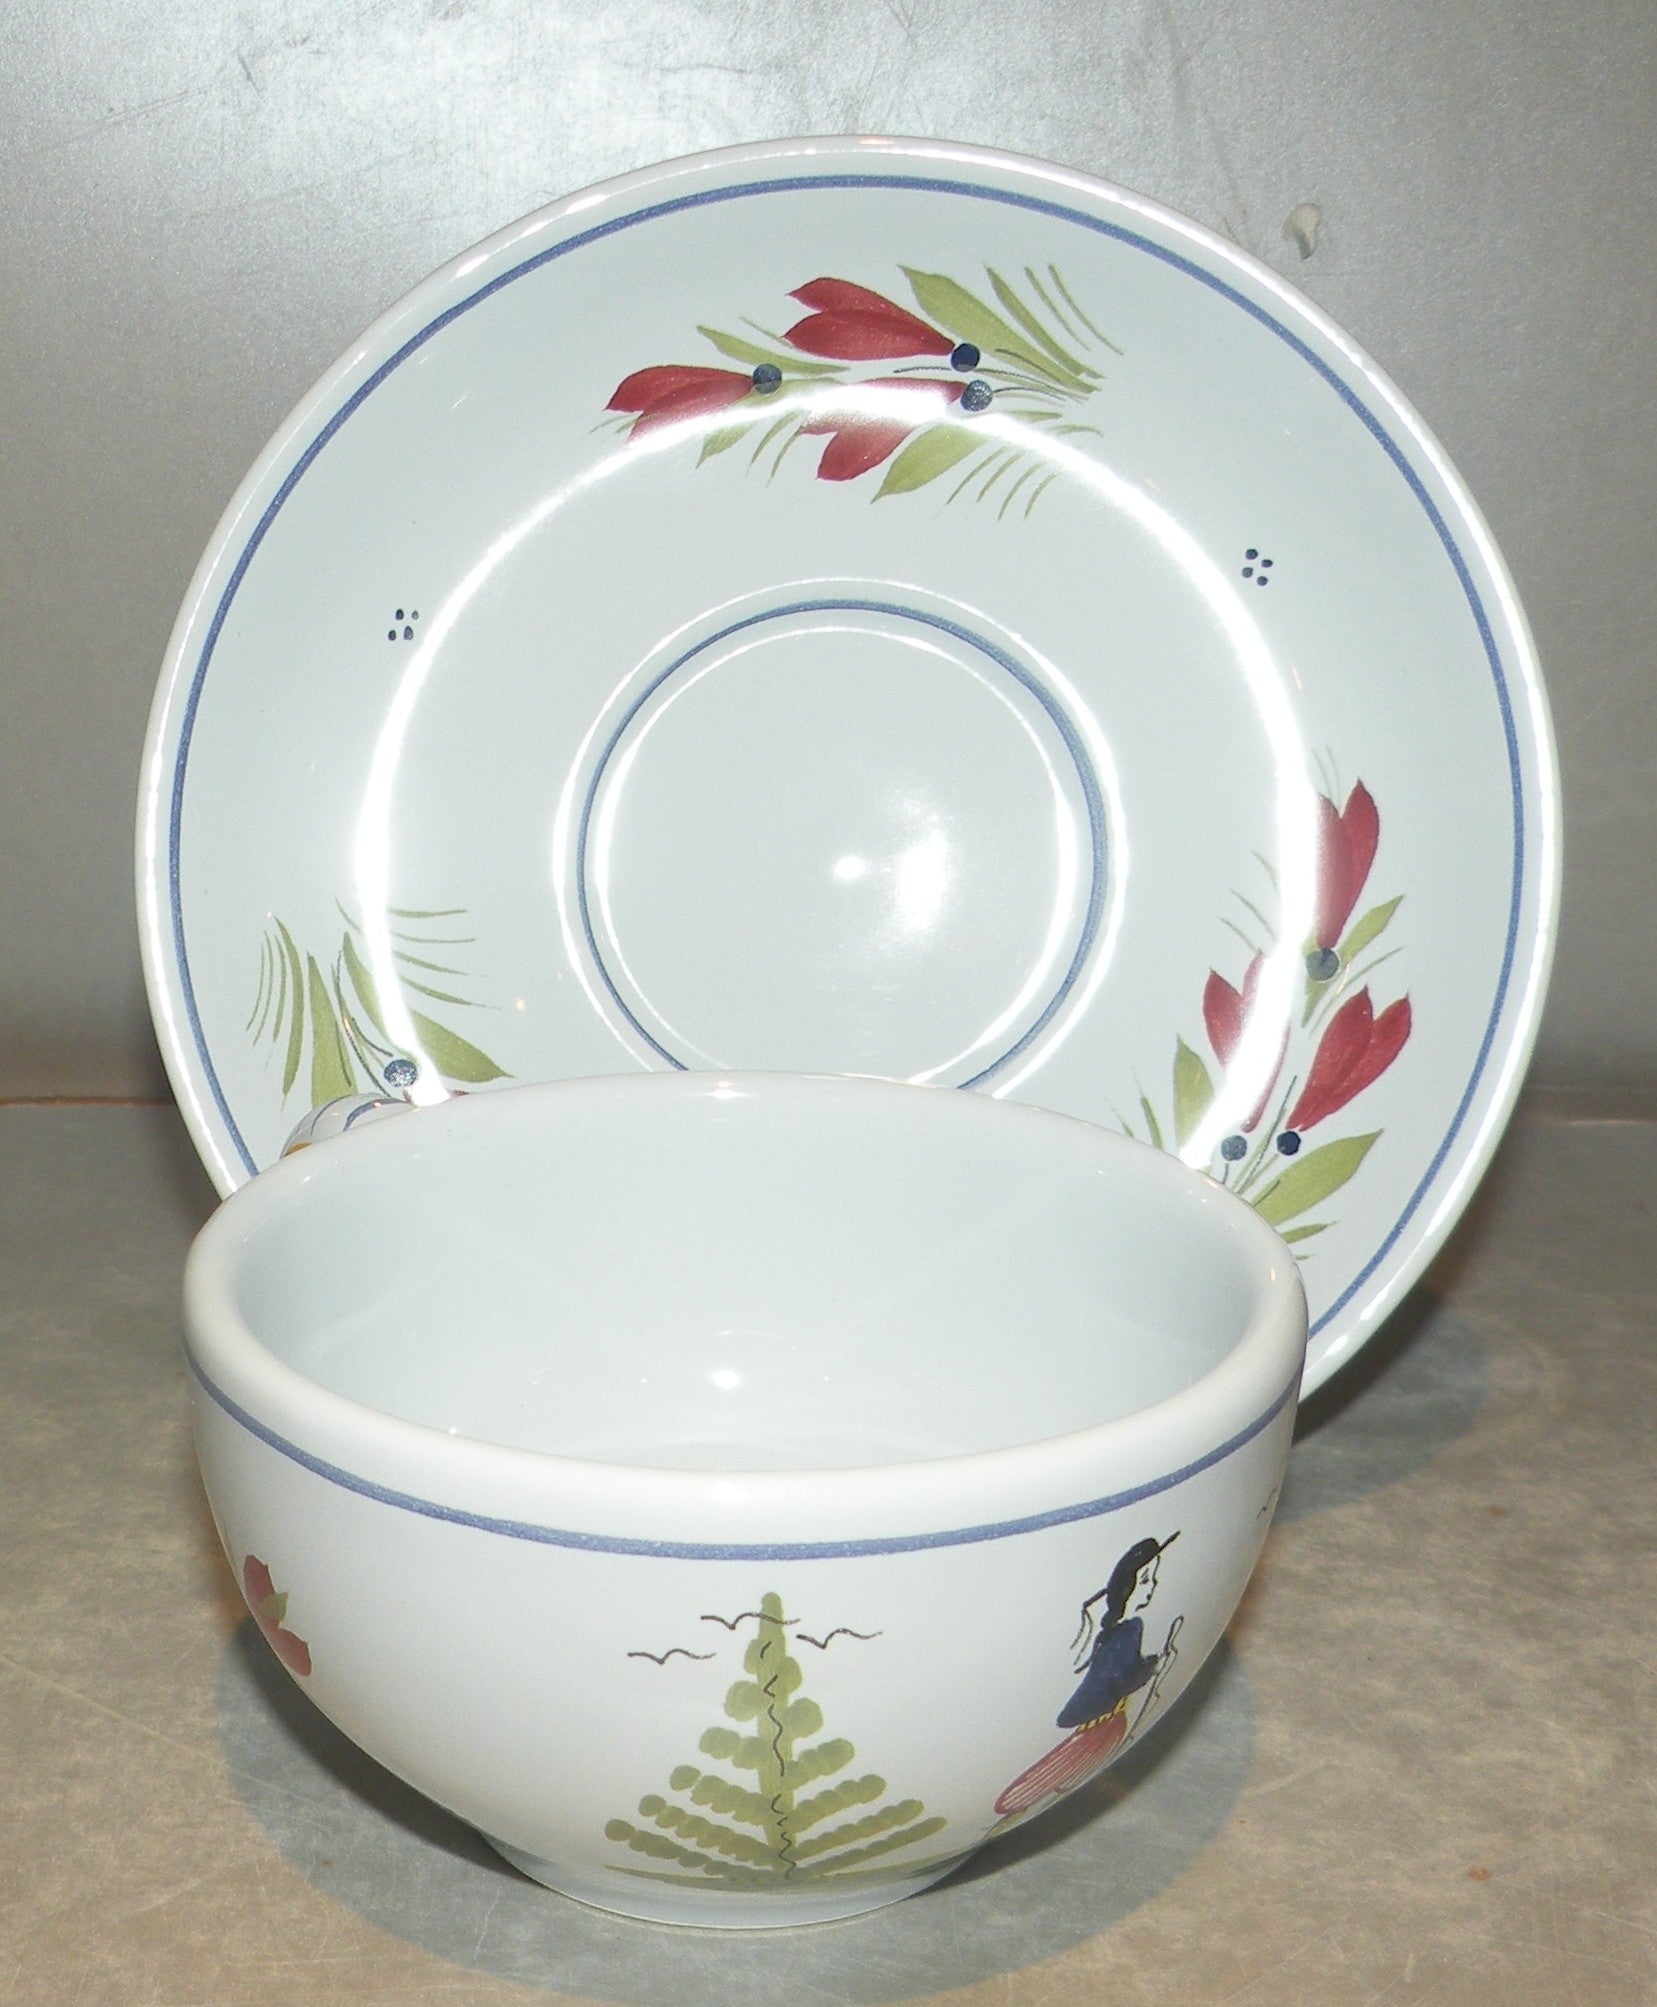 Tea Cup with Man & Saucer Mistral Blue